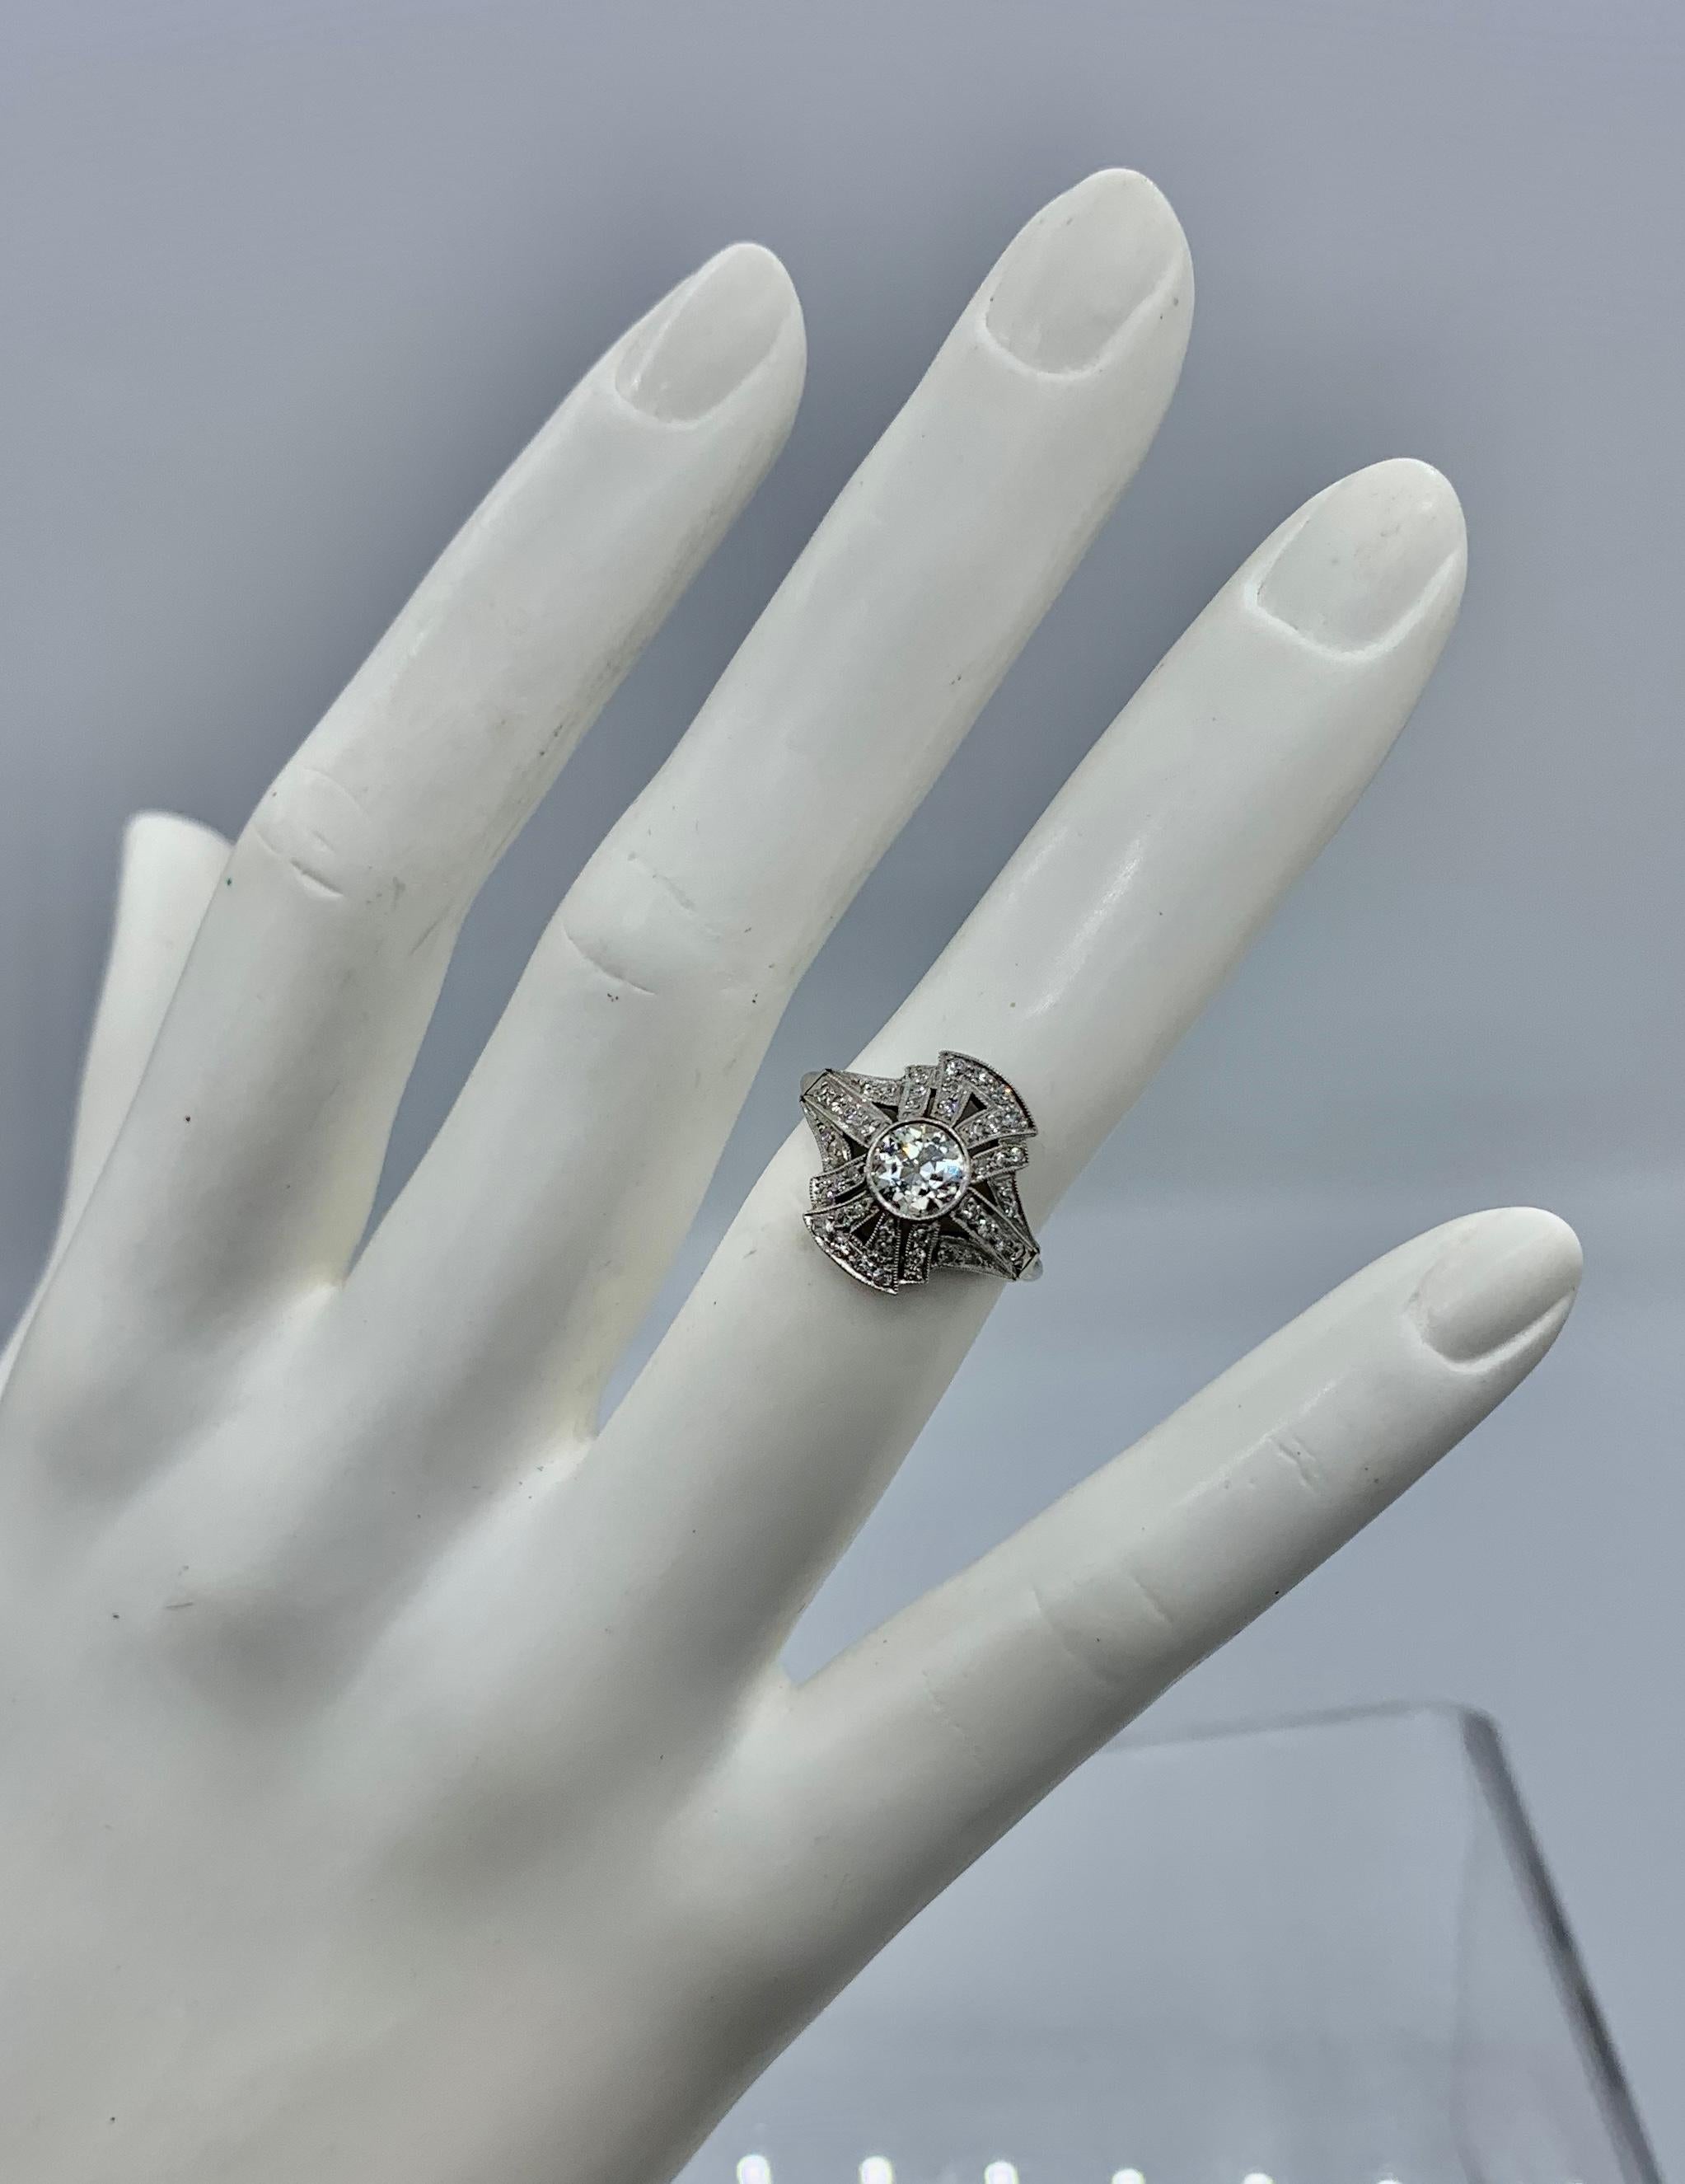 This is a stunning and dramatic Antique Art Deco Old Mine Cut Diamond Ring in Platinum with a gorgeous central .6 Carat Old Mine Diamond.  The central diamond is surrounded by a spectacular architectural design with adornments that echo the iconic